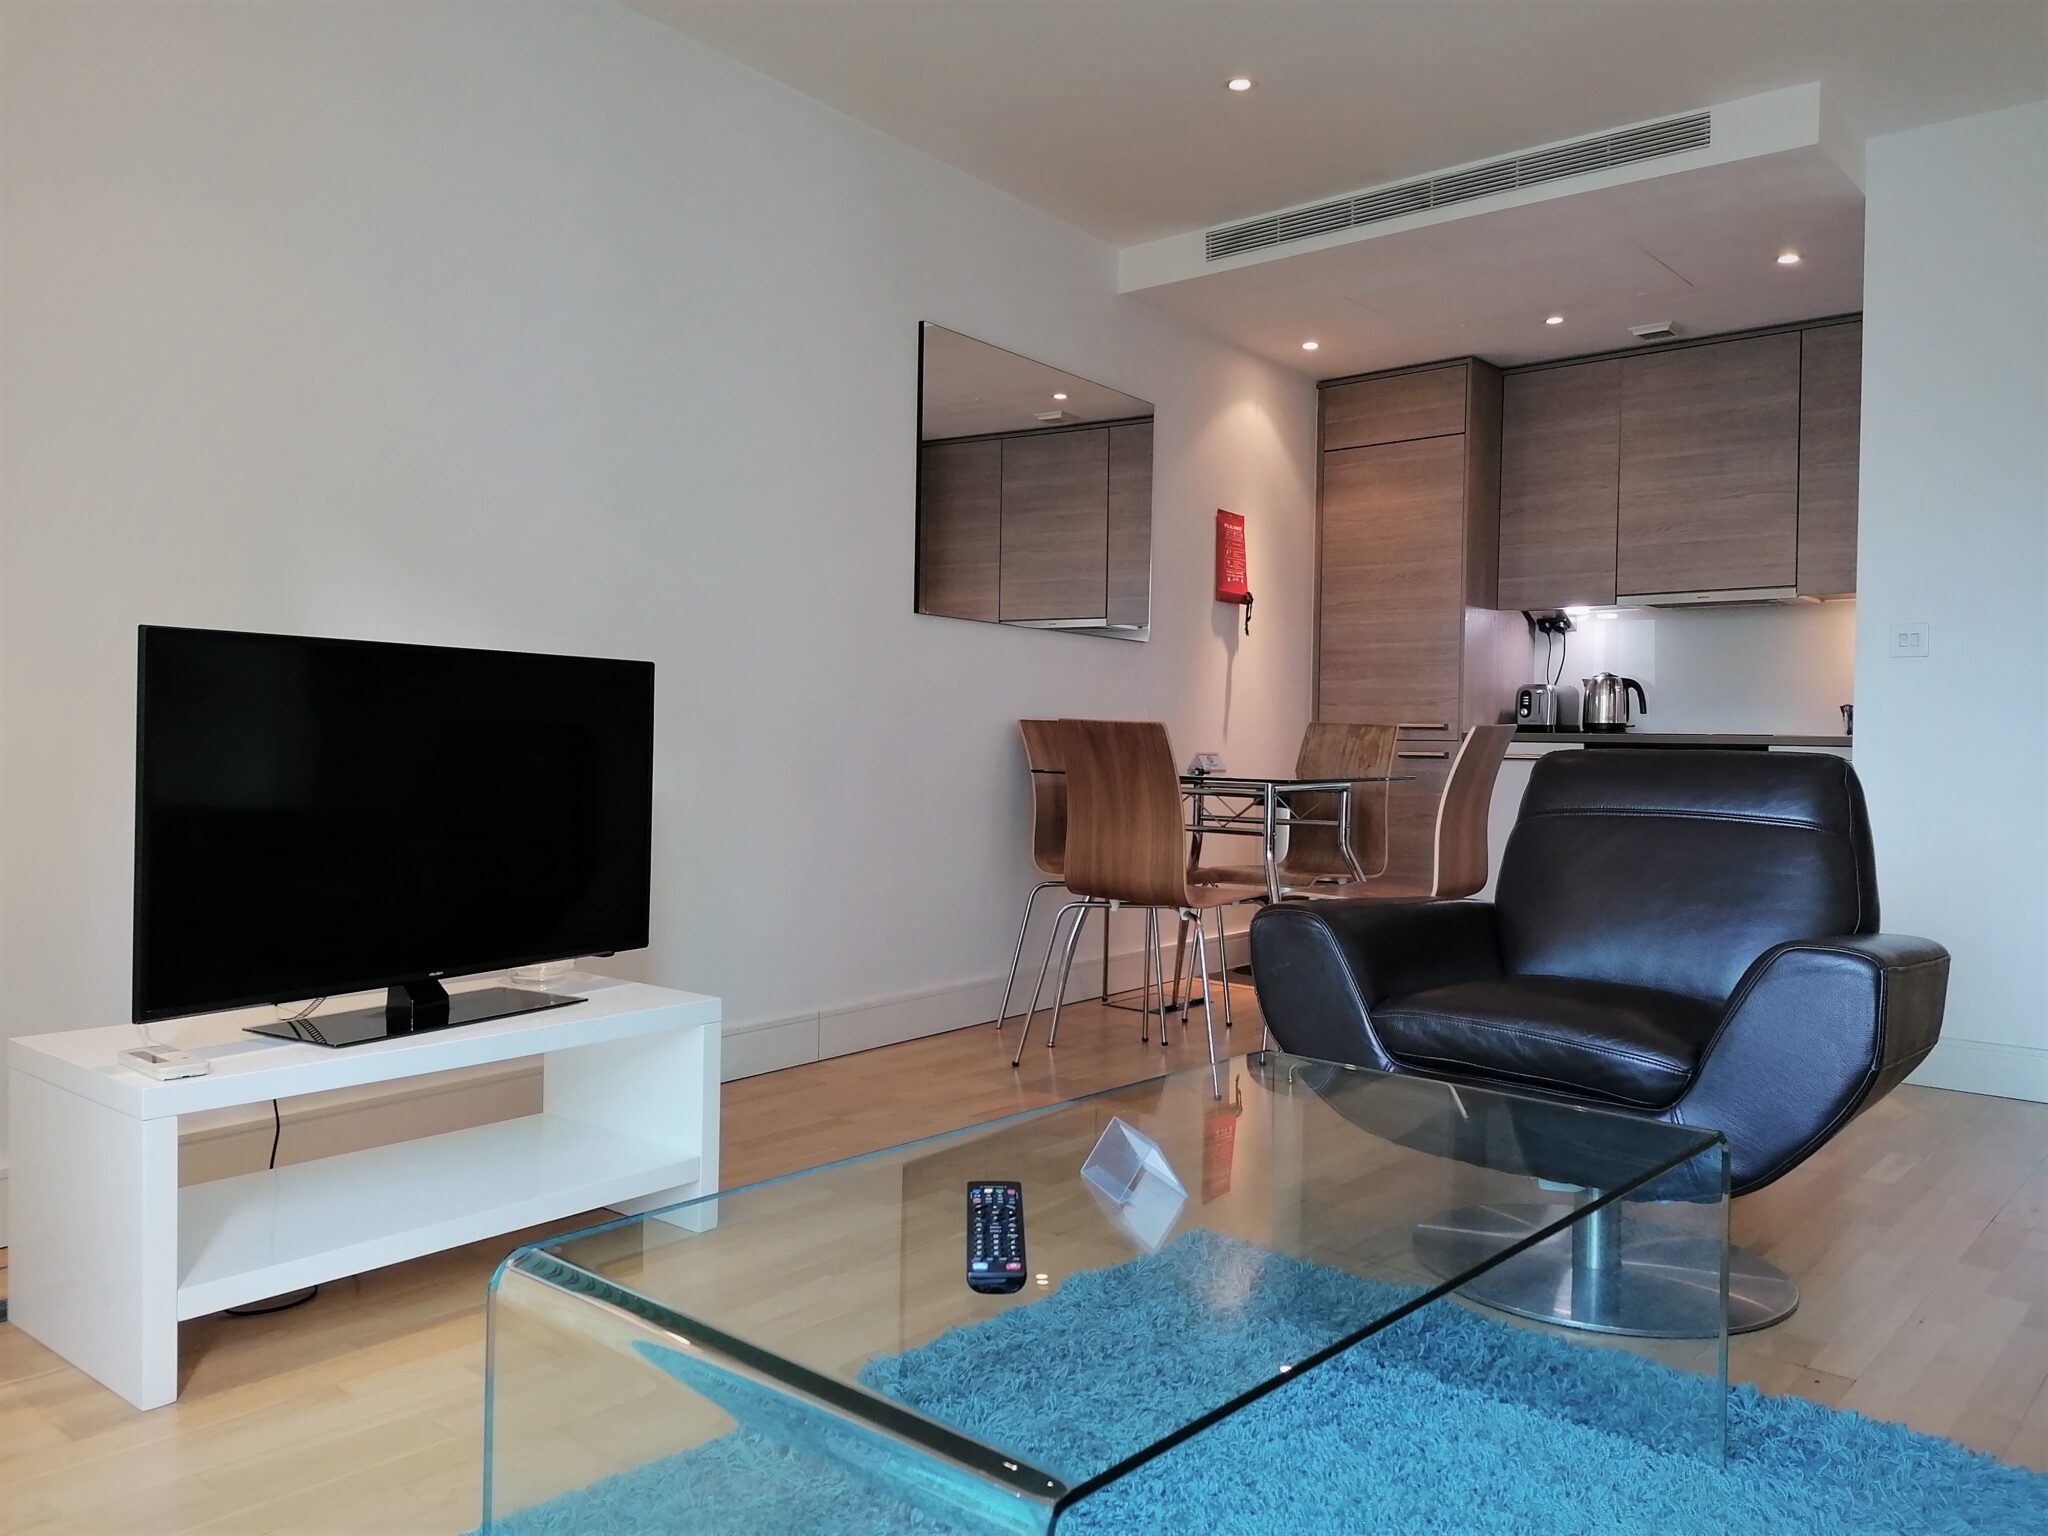 One Whites Row Apartments - East London Serviced Apartments - London | Urban Stay